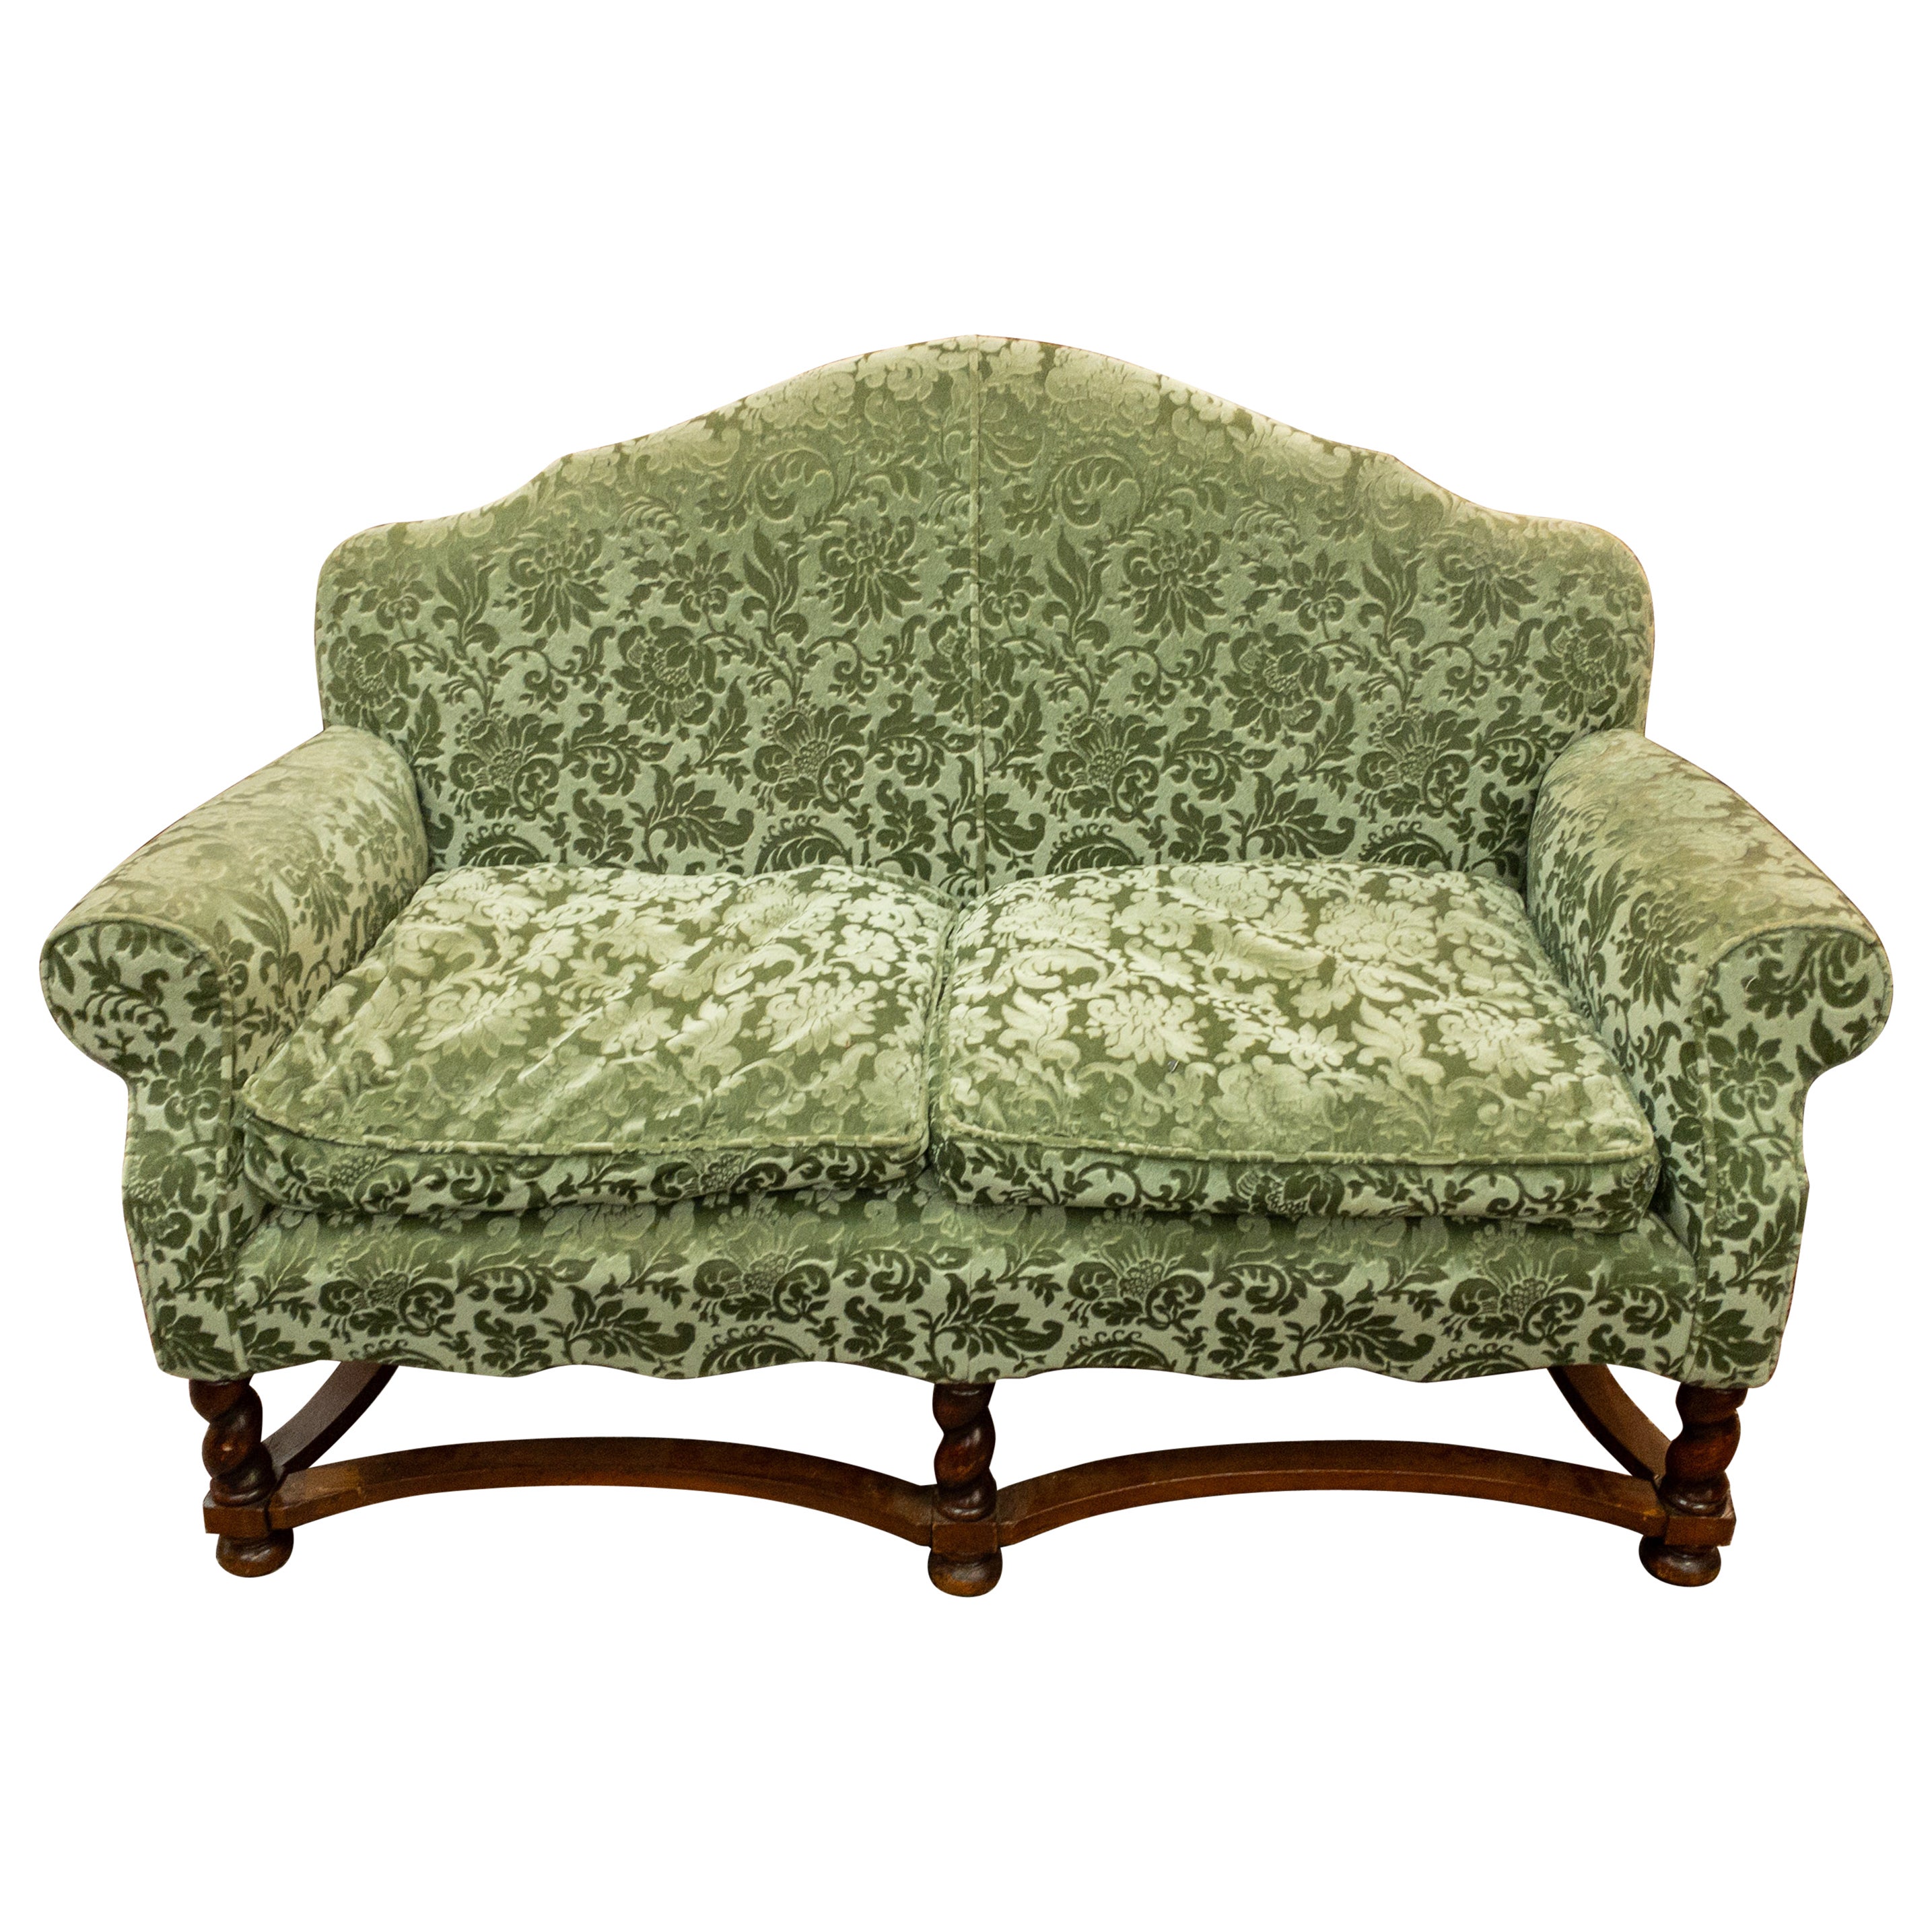 1940's French Upholstered Sofa For Sale